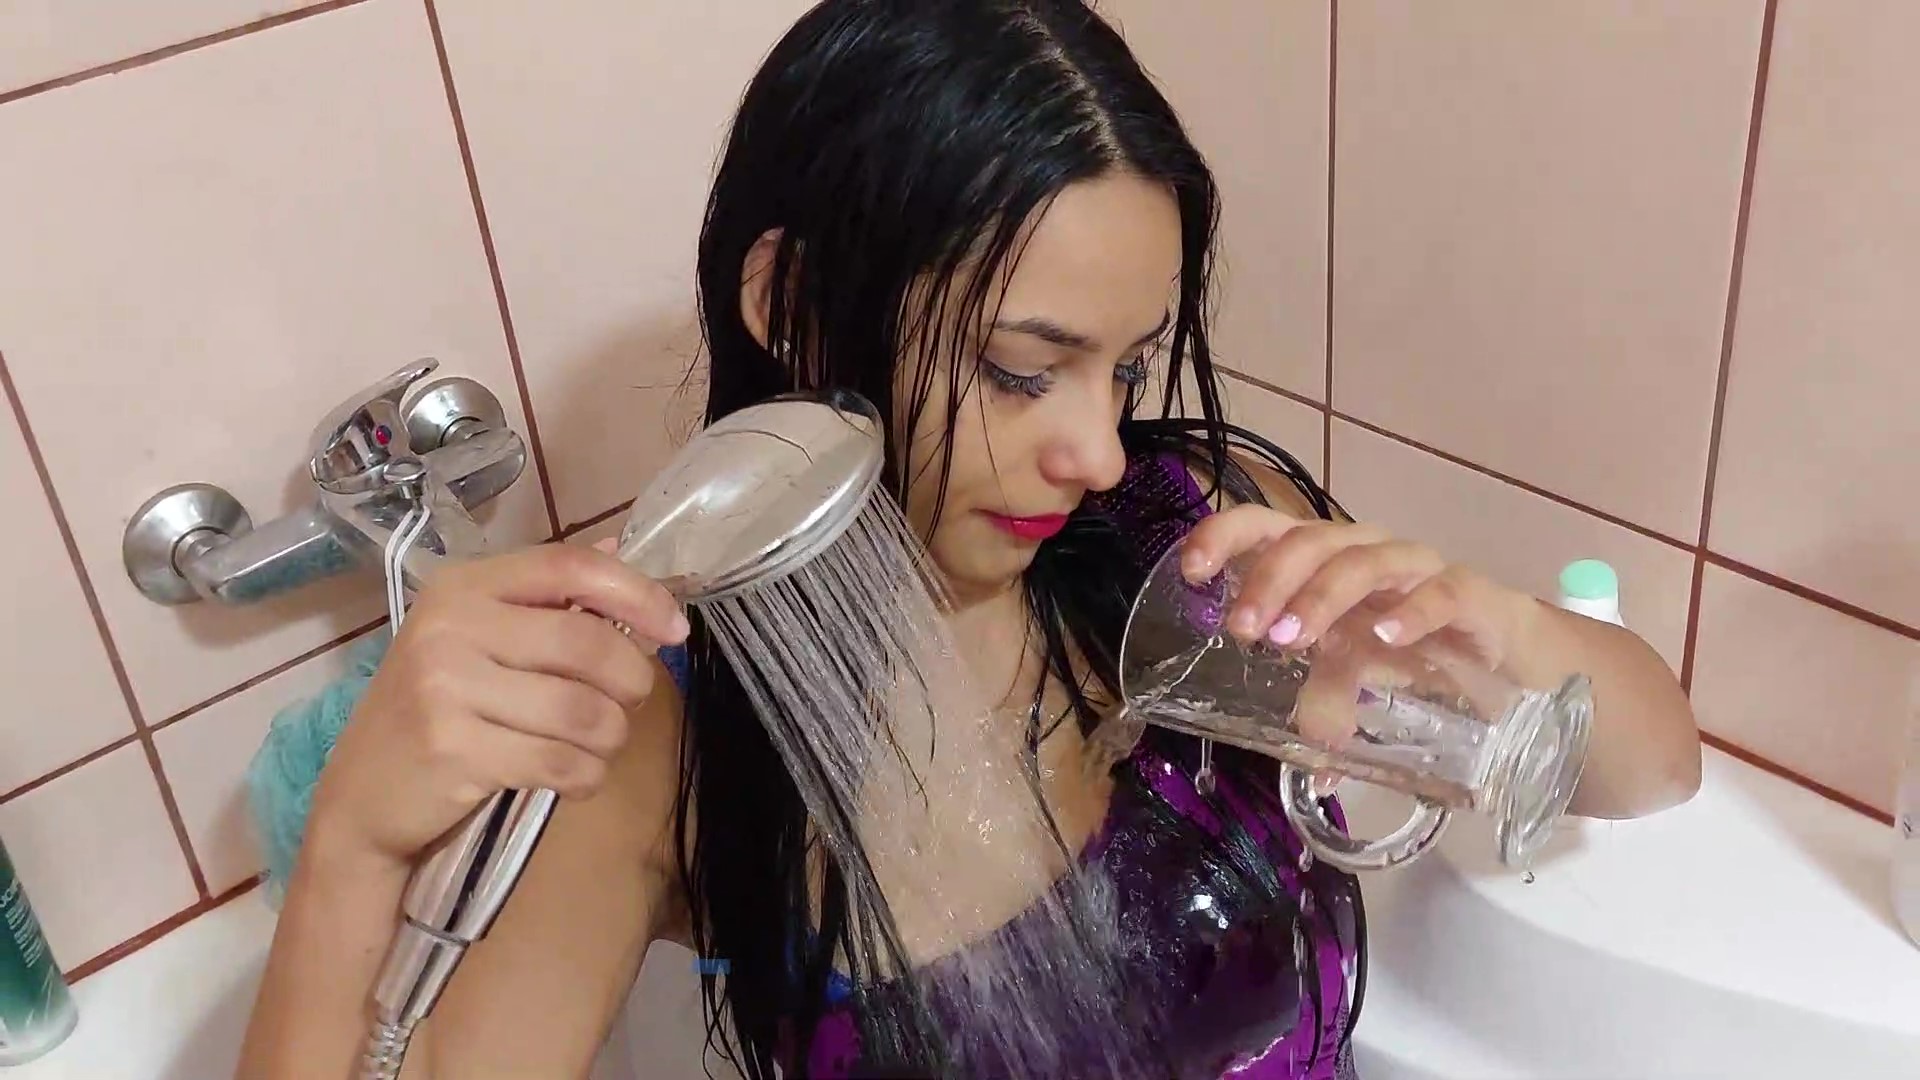 New hot home shower video by Gina - frame at 1m5s